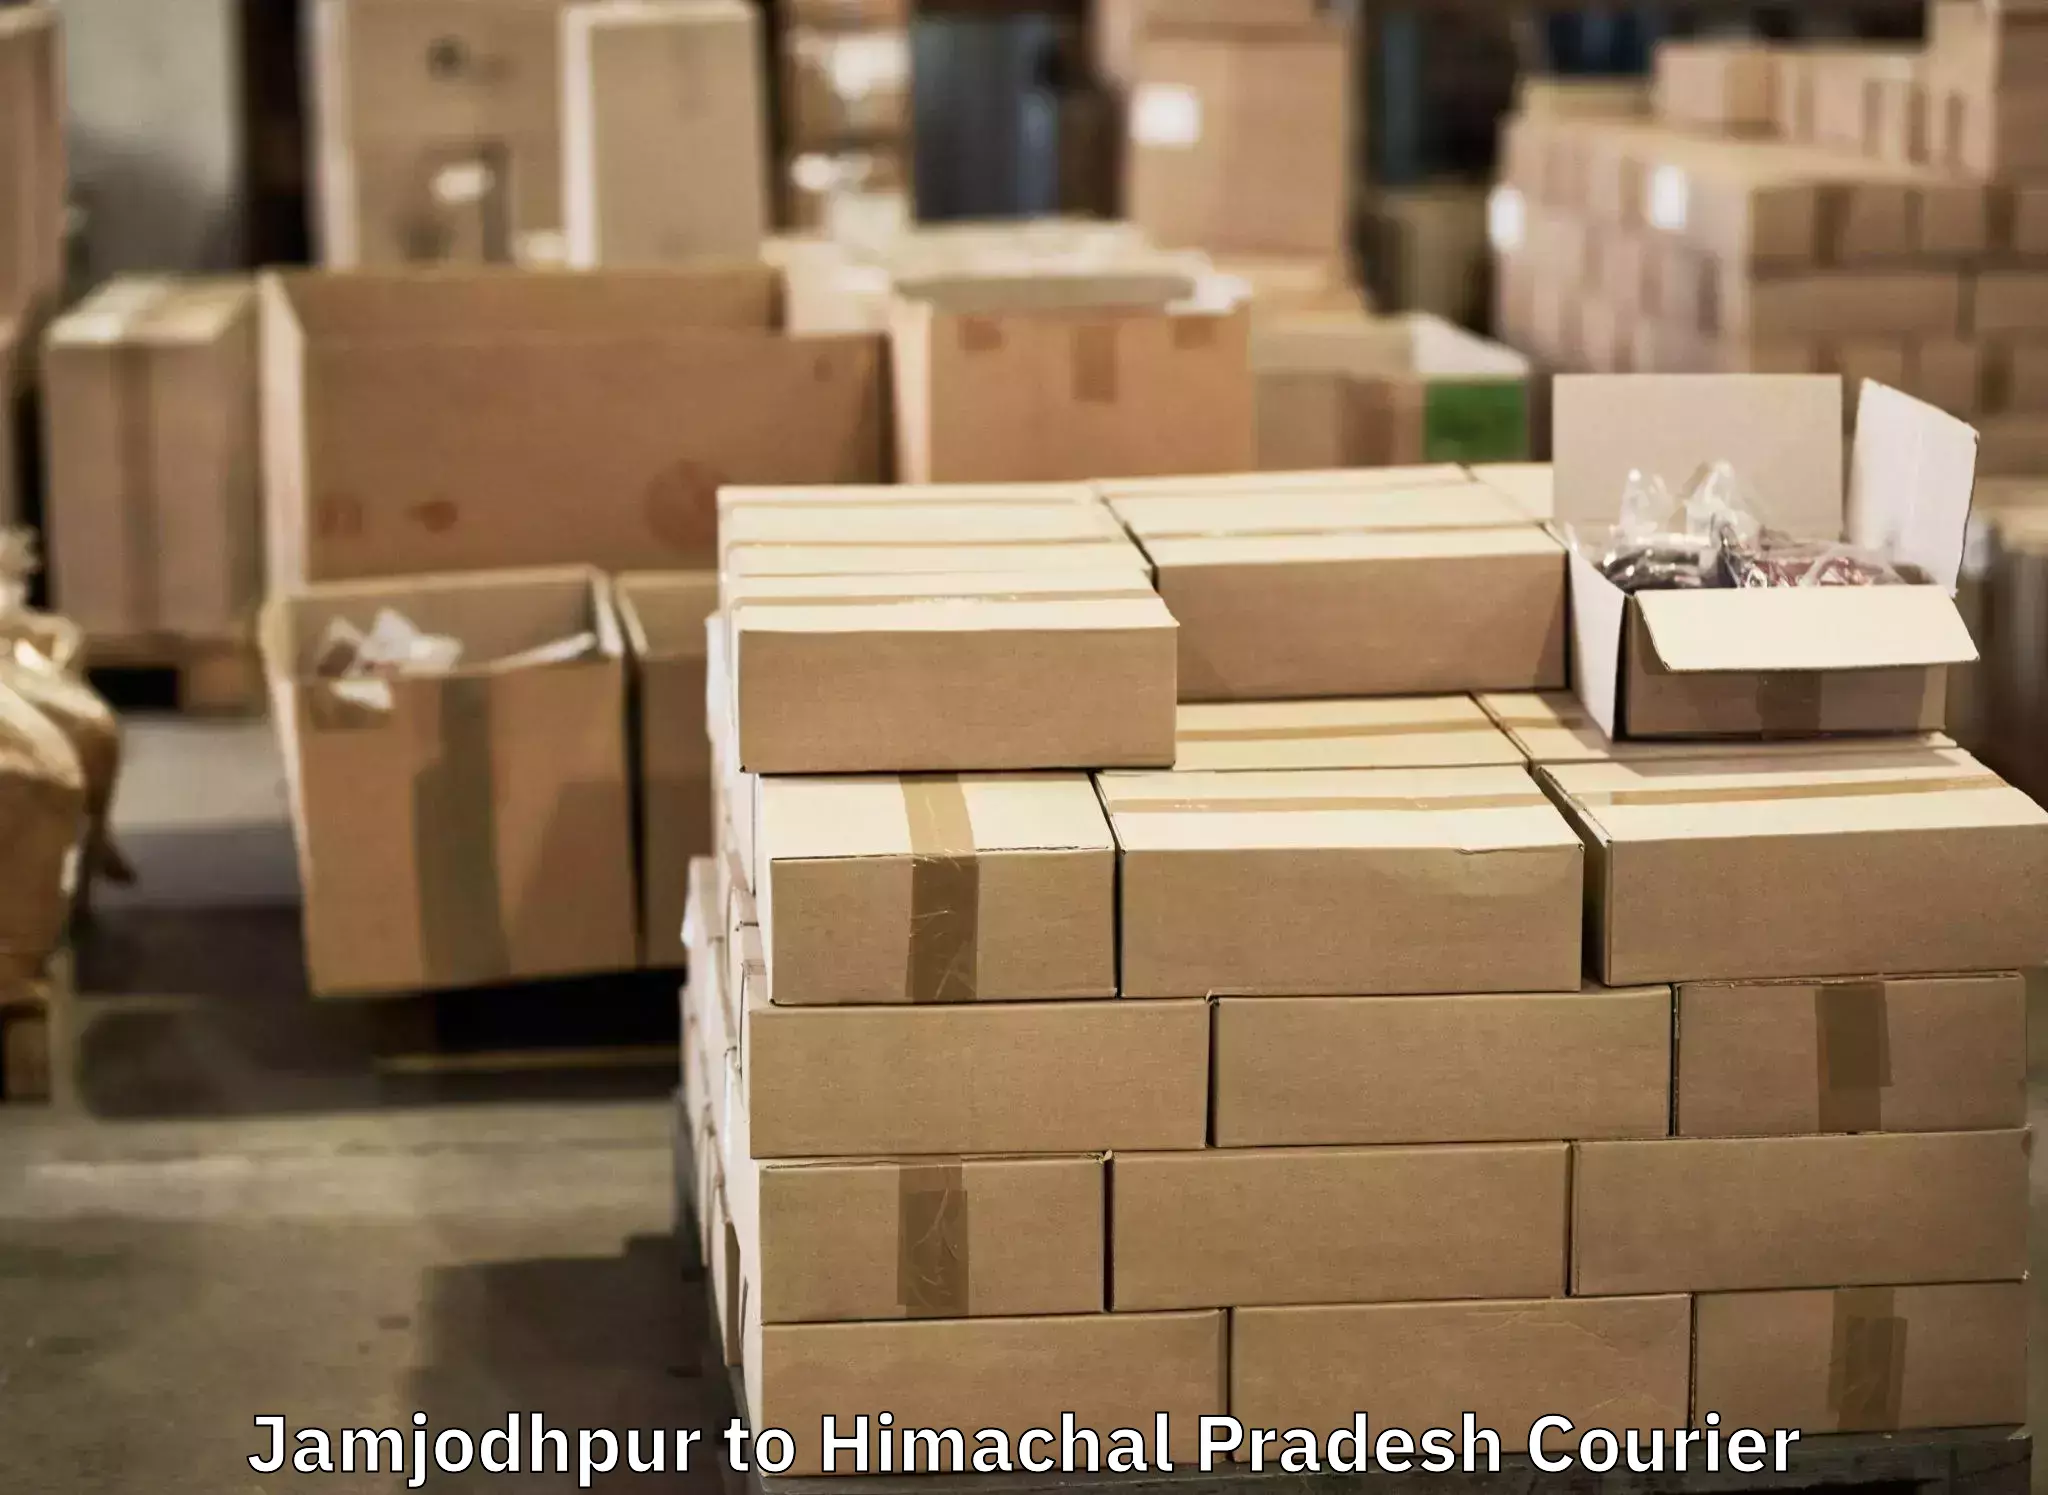 Luggage delivery providers Jamjodhpur to Ghumarwin